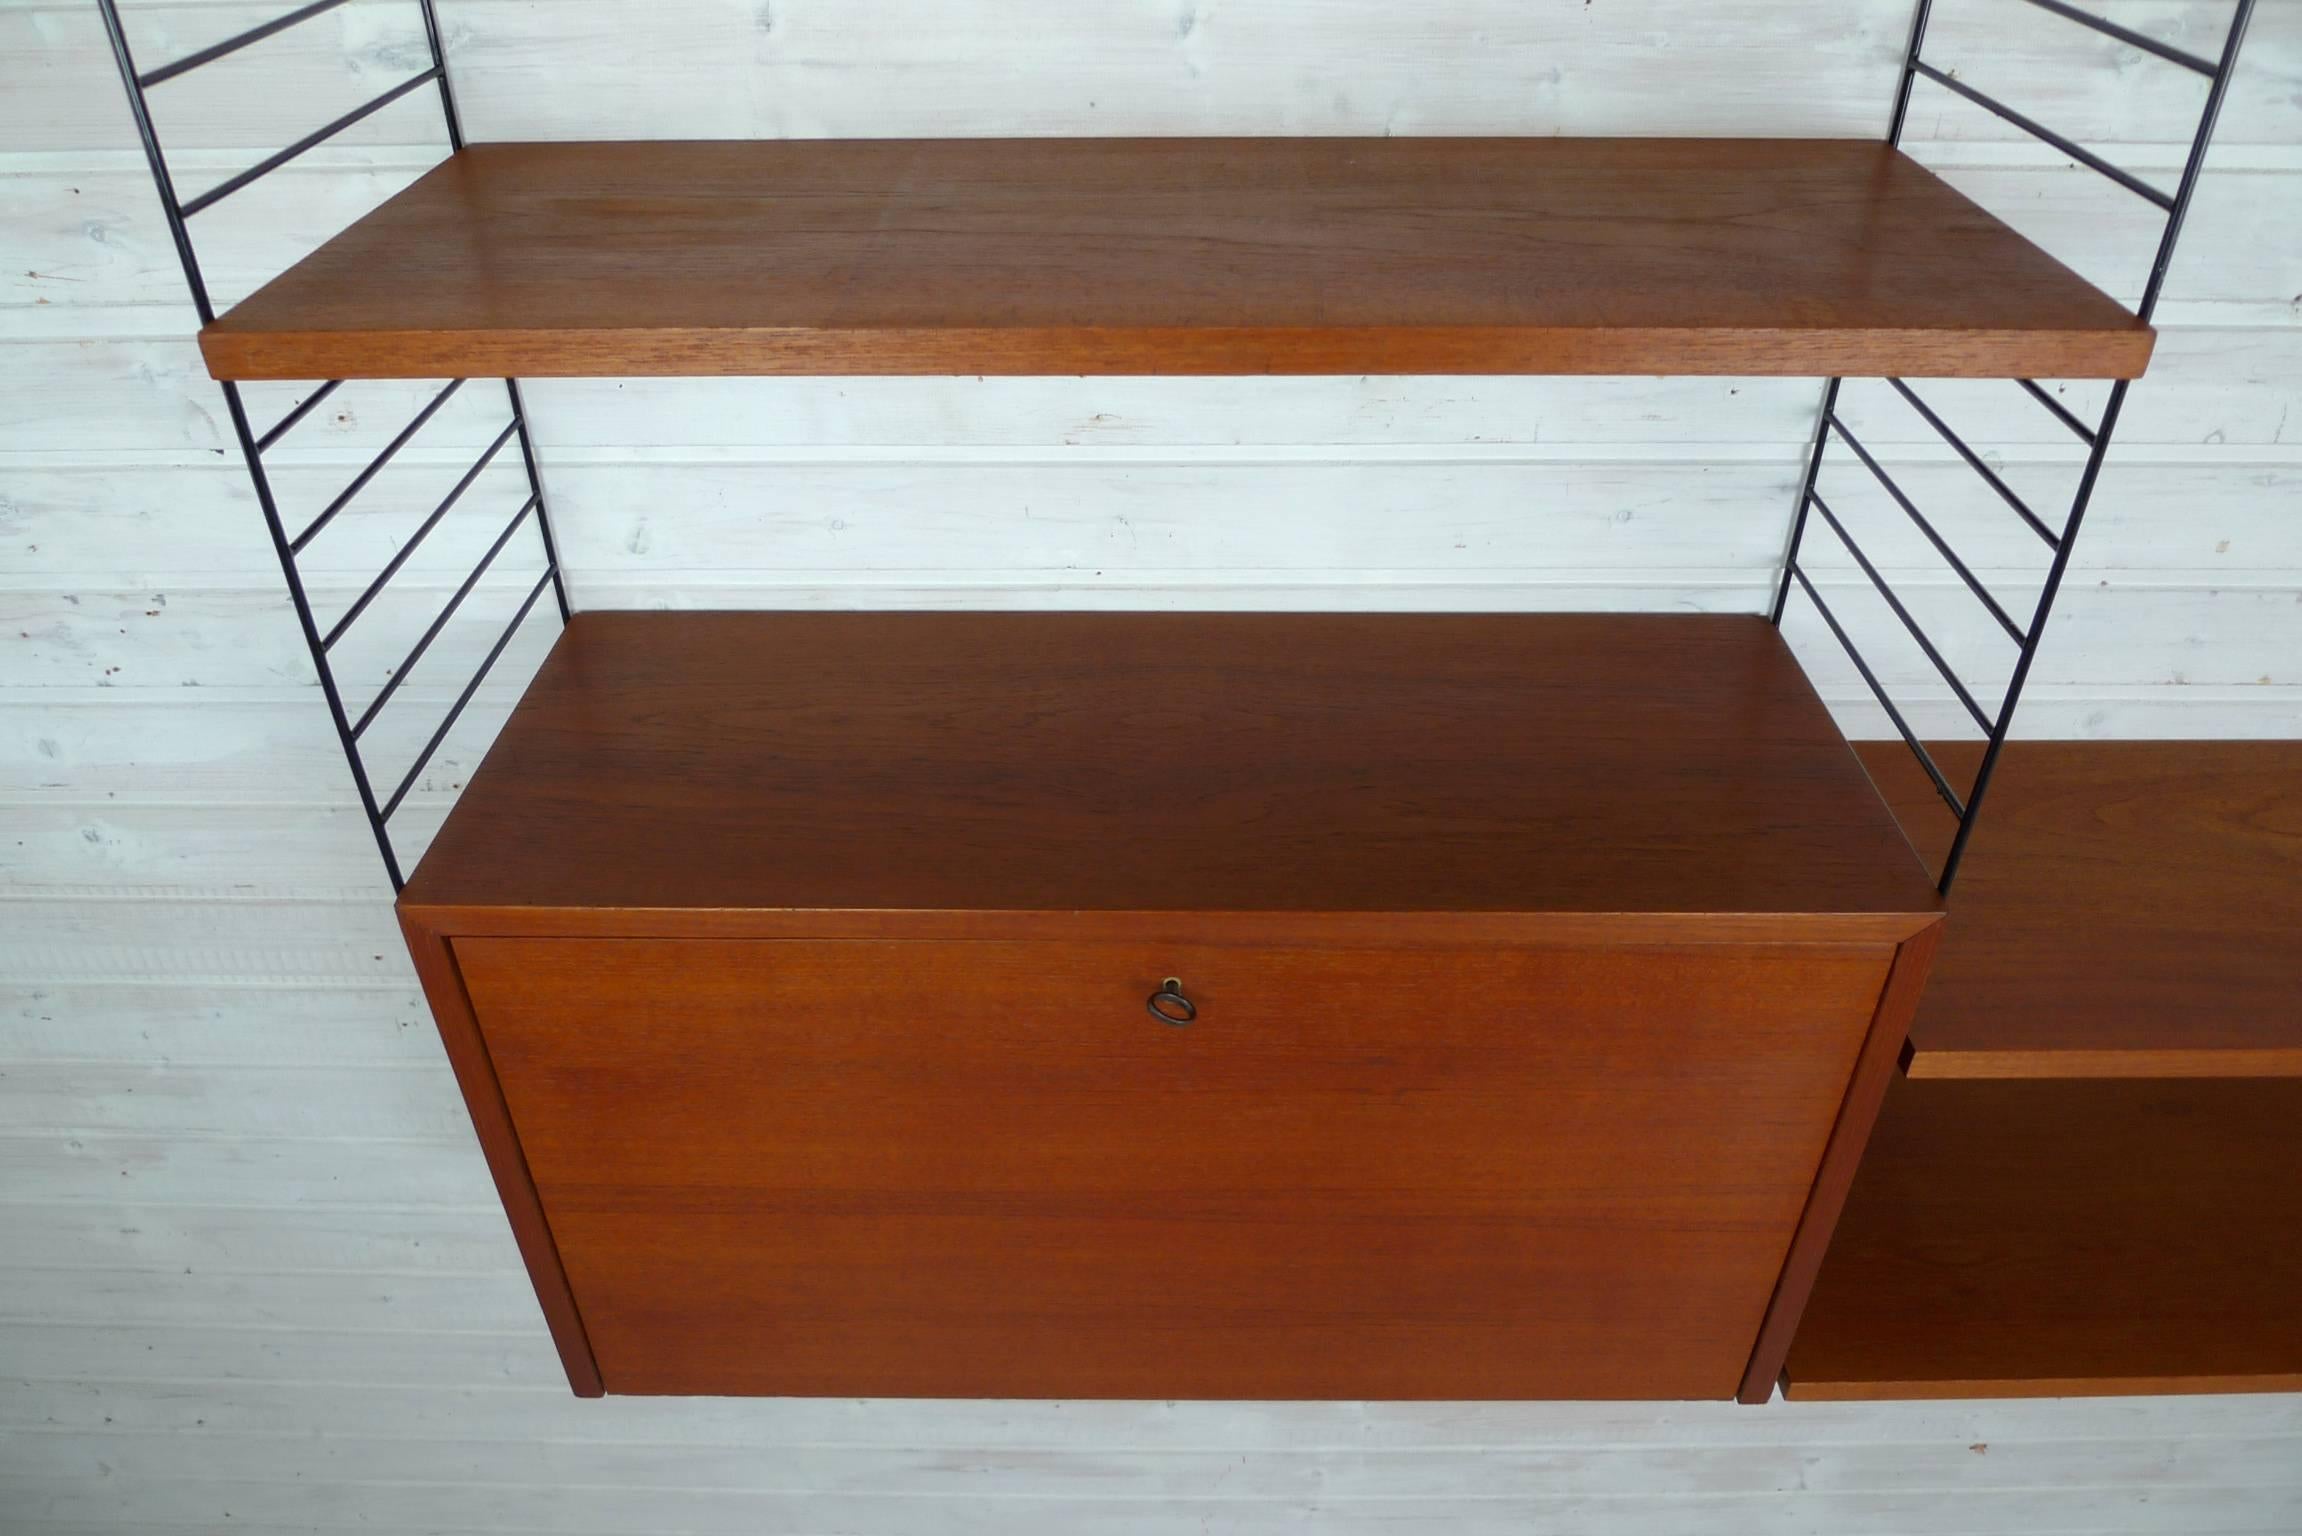 Swedish Wall Unit with Teak Box and Shelves by Nisse Strinning for String, 1950s For Sale 2